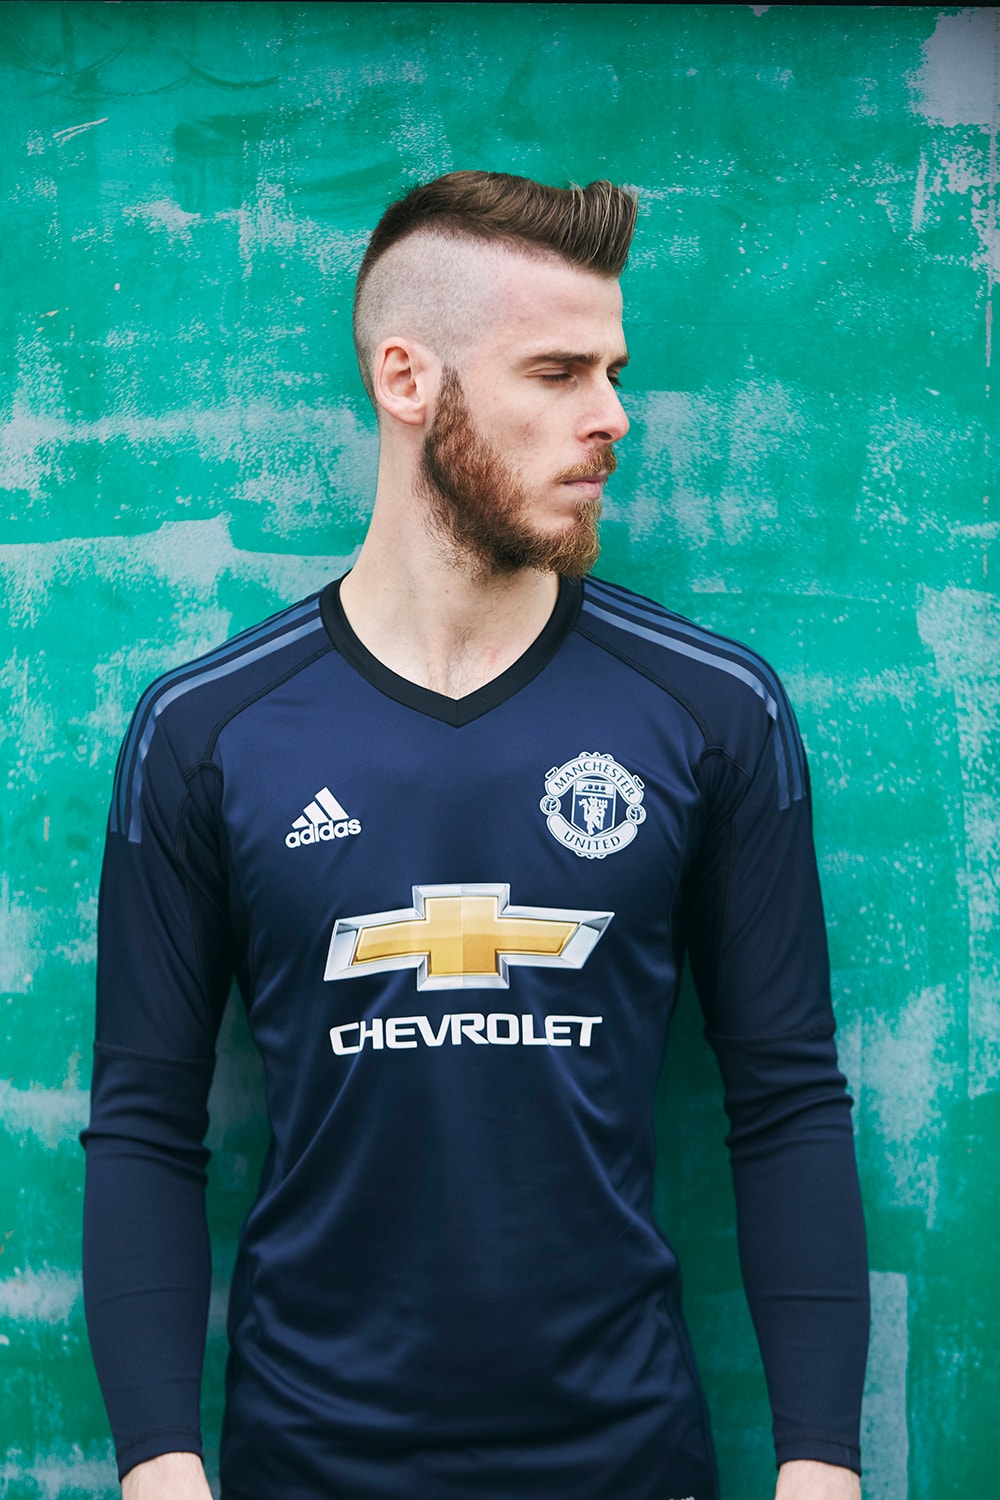 Manchester United 2017 2018 Home Kit Red Jersey adidas Football